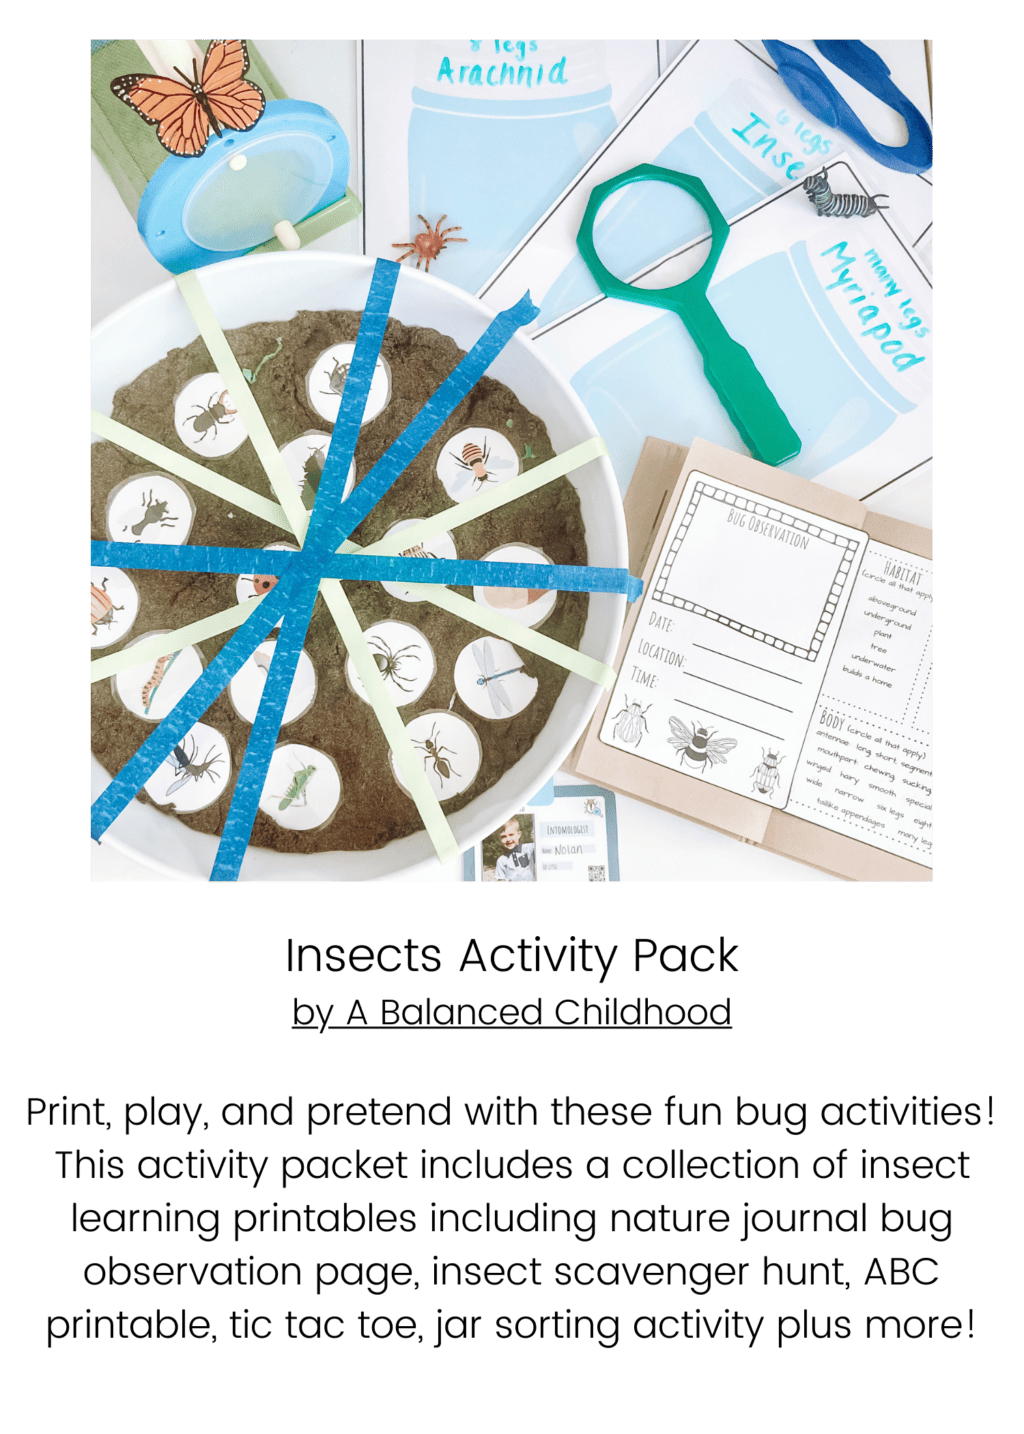 Insects Activity Pack Info